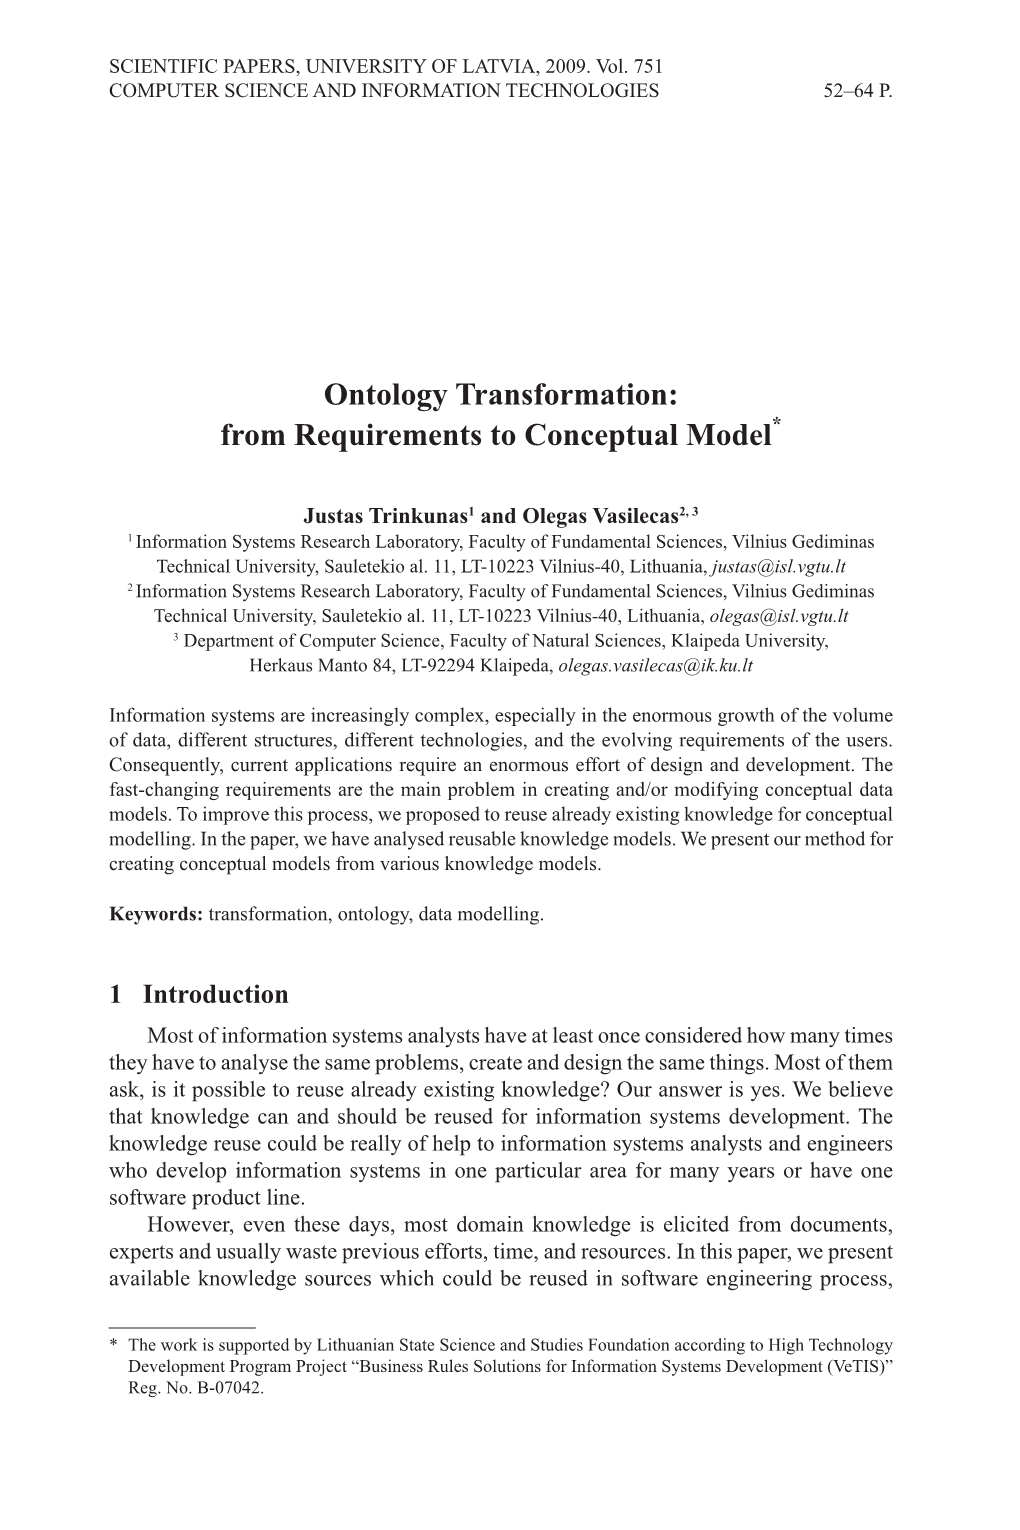 Ontology Transformation: from Requirements to Conceptual Model*